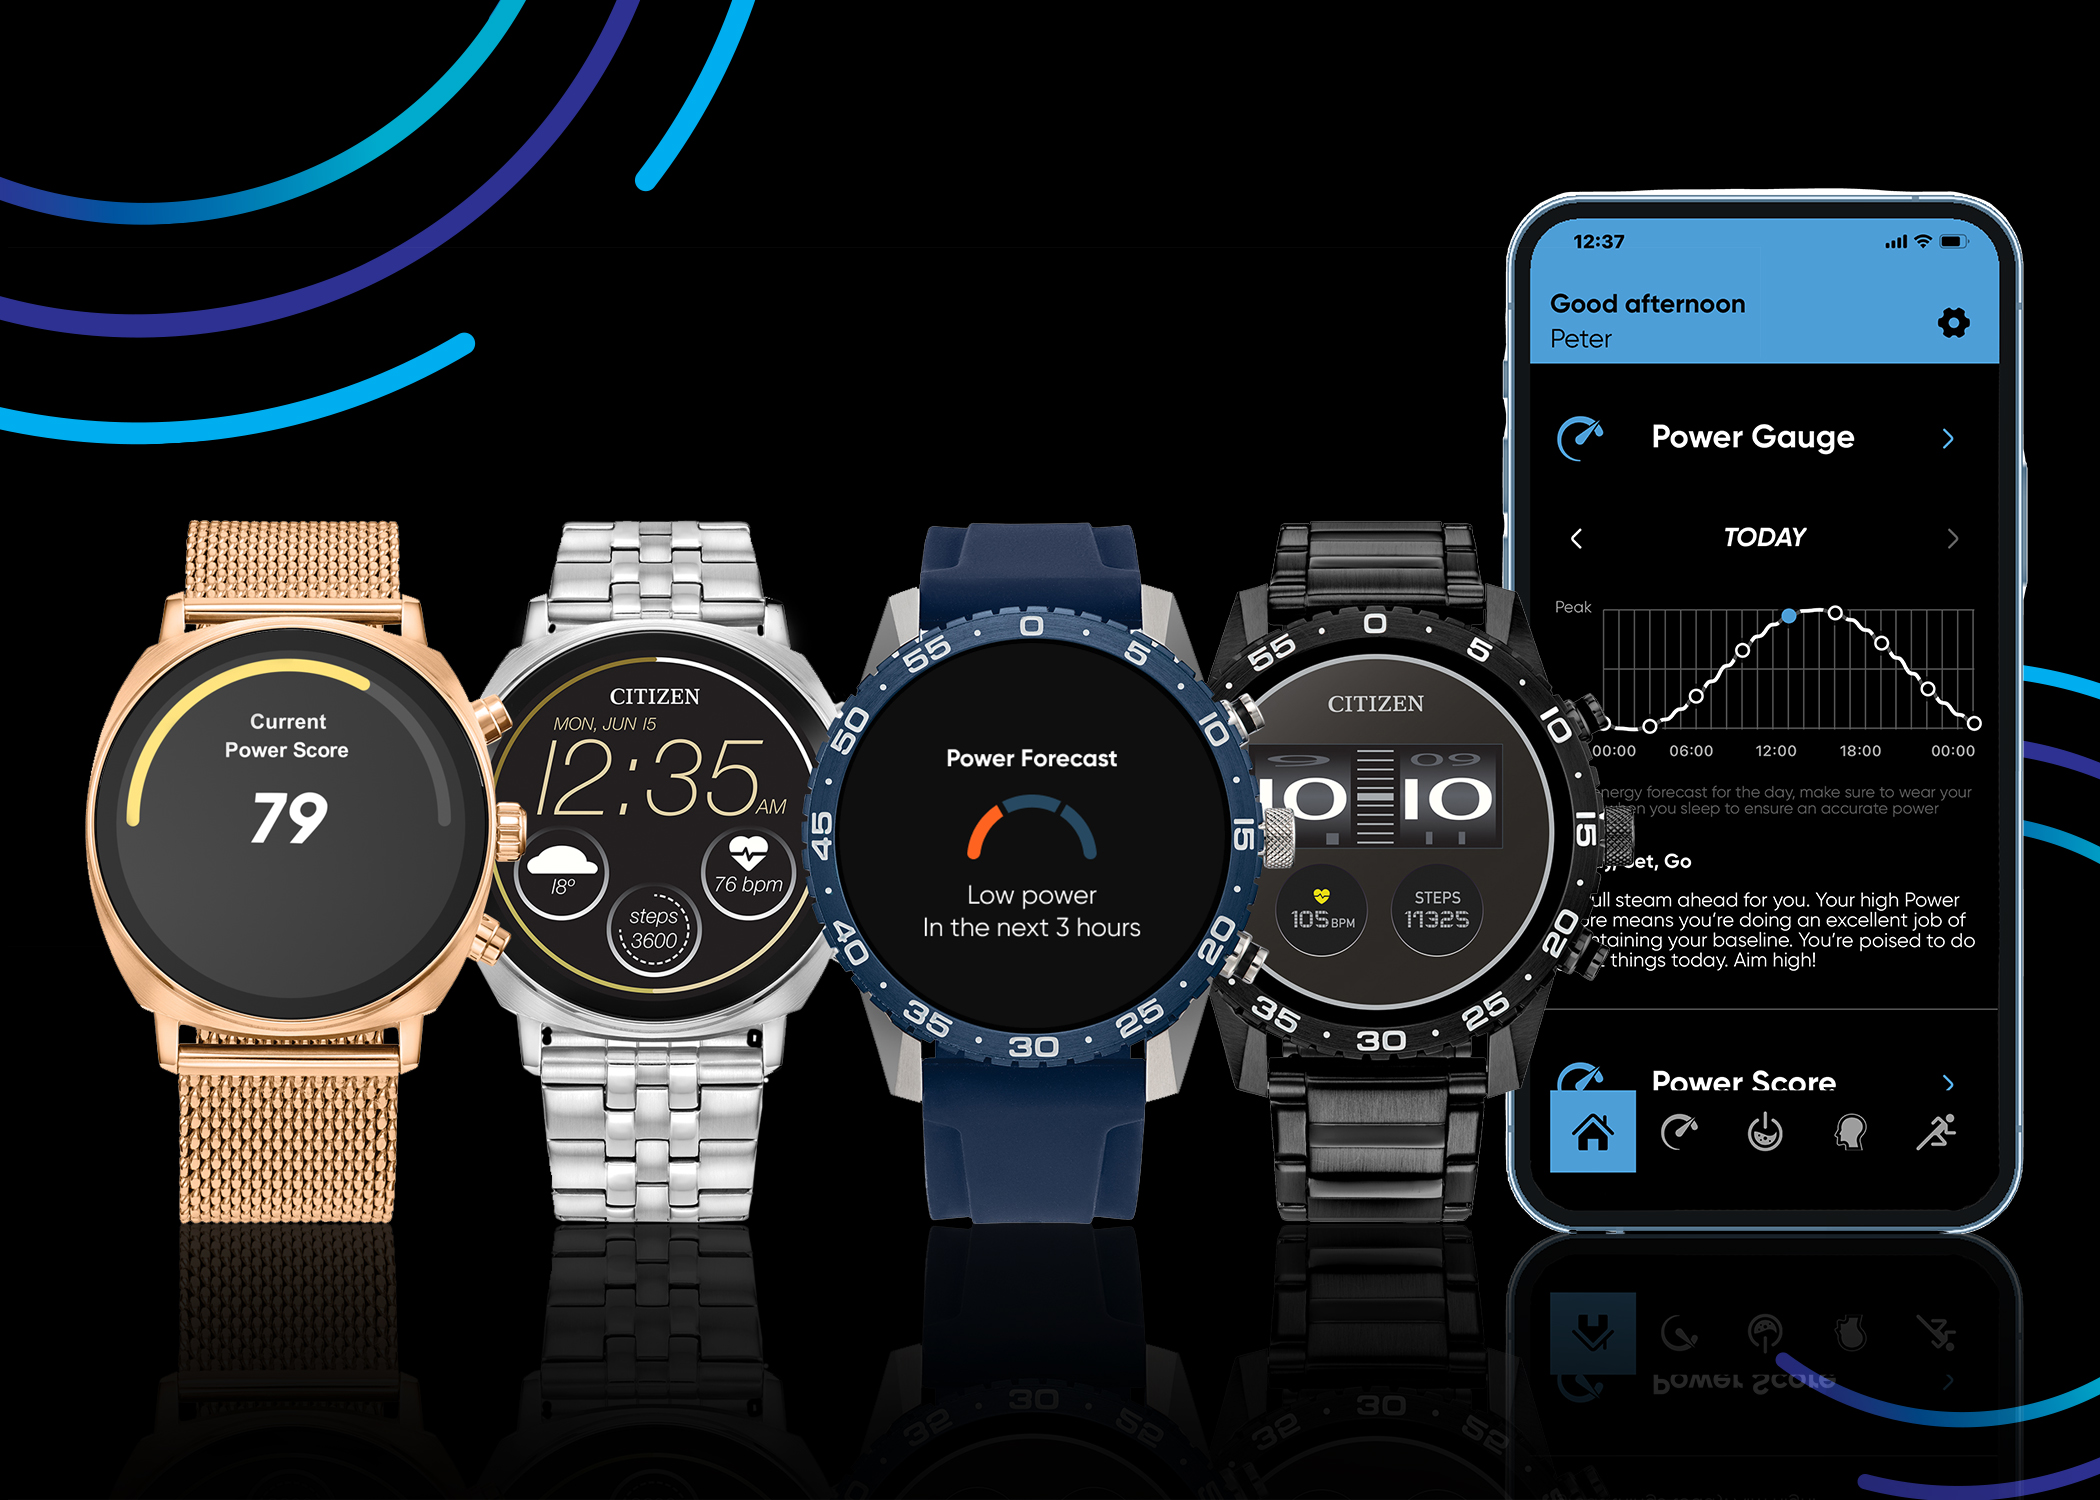 CITIZEN Debuts New CZ Smart Watch at CES 2023